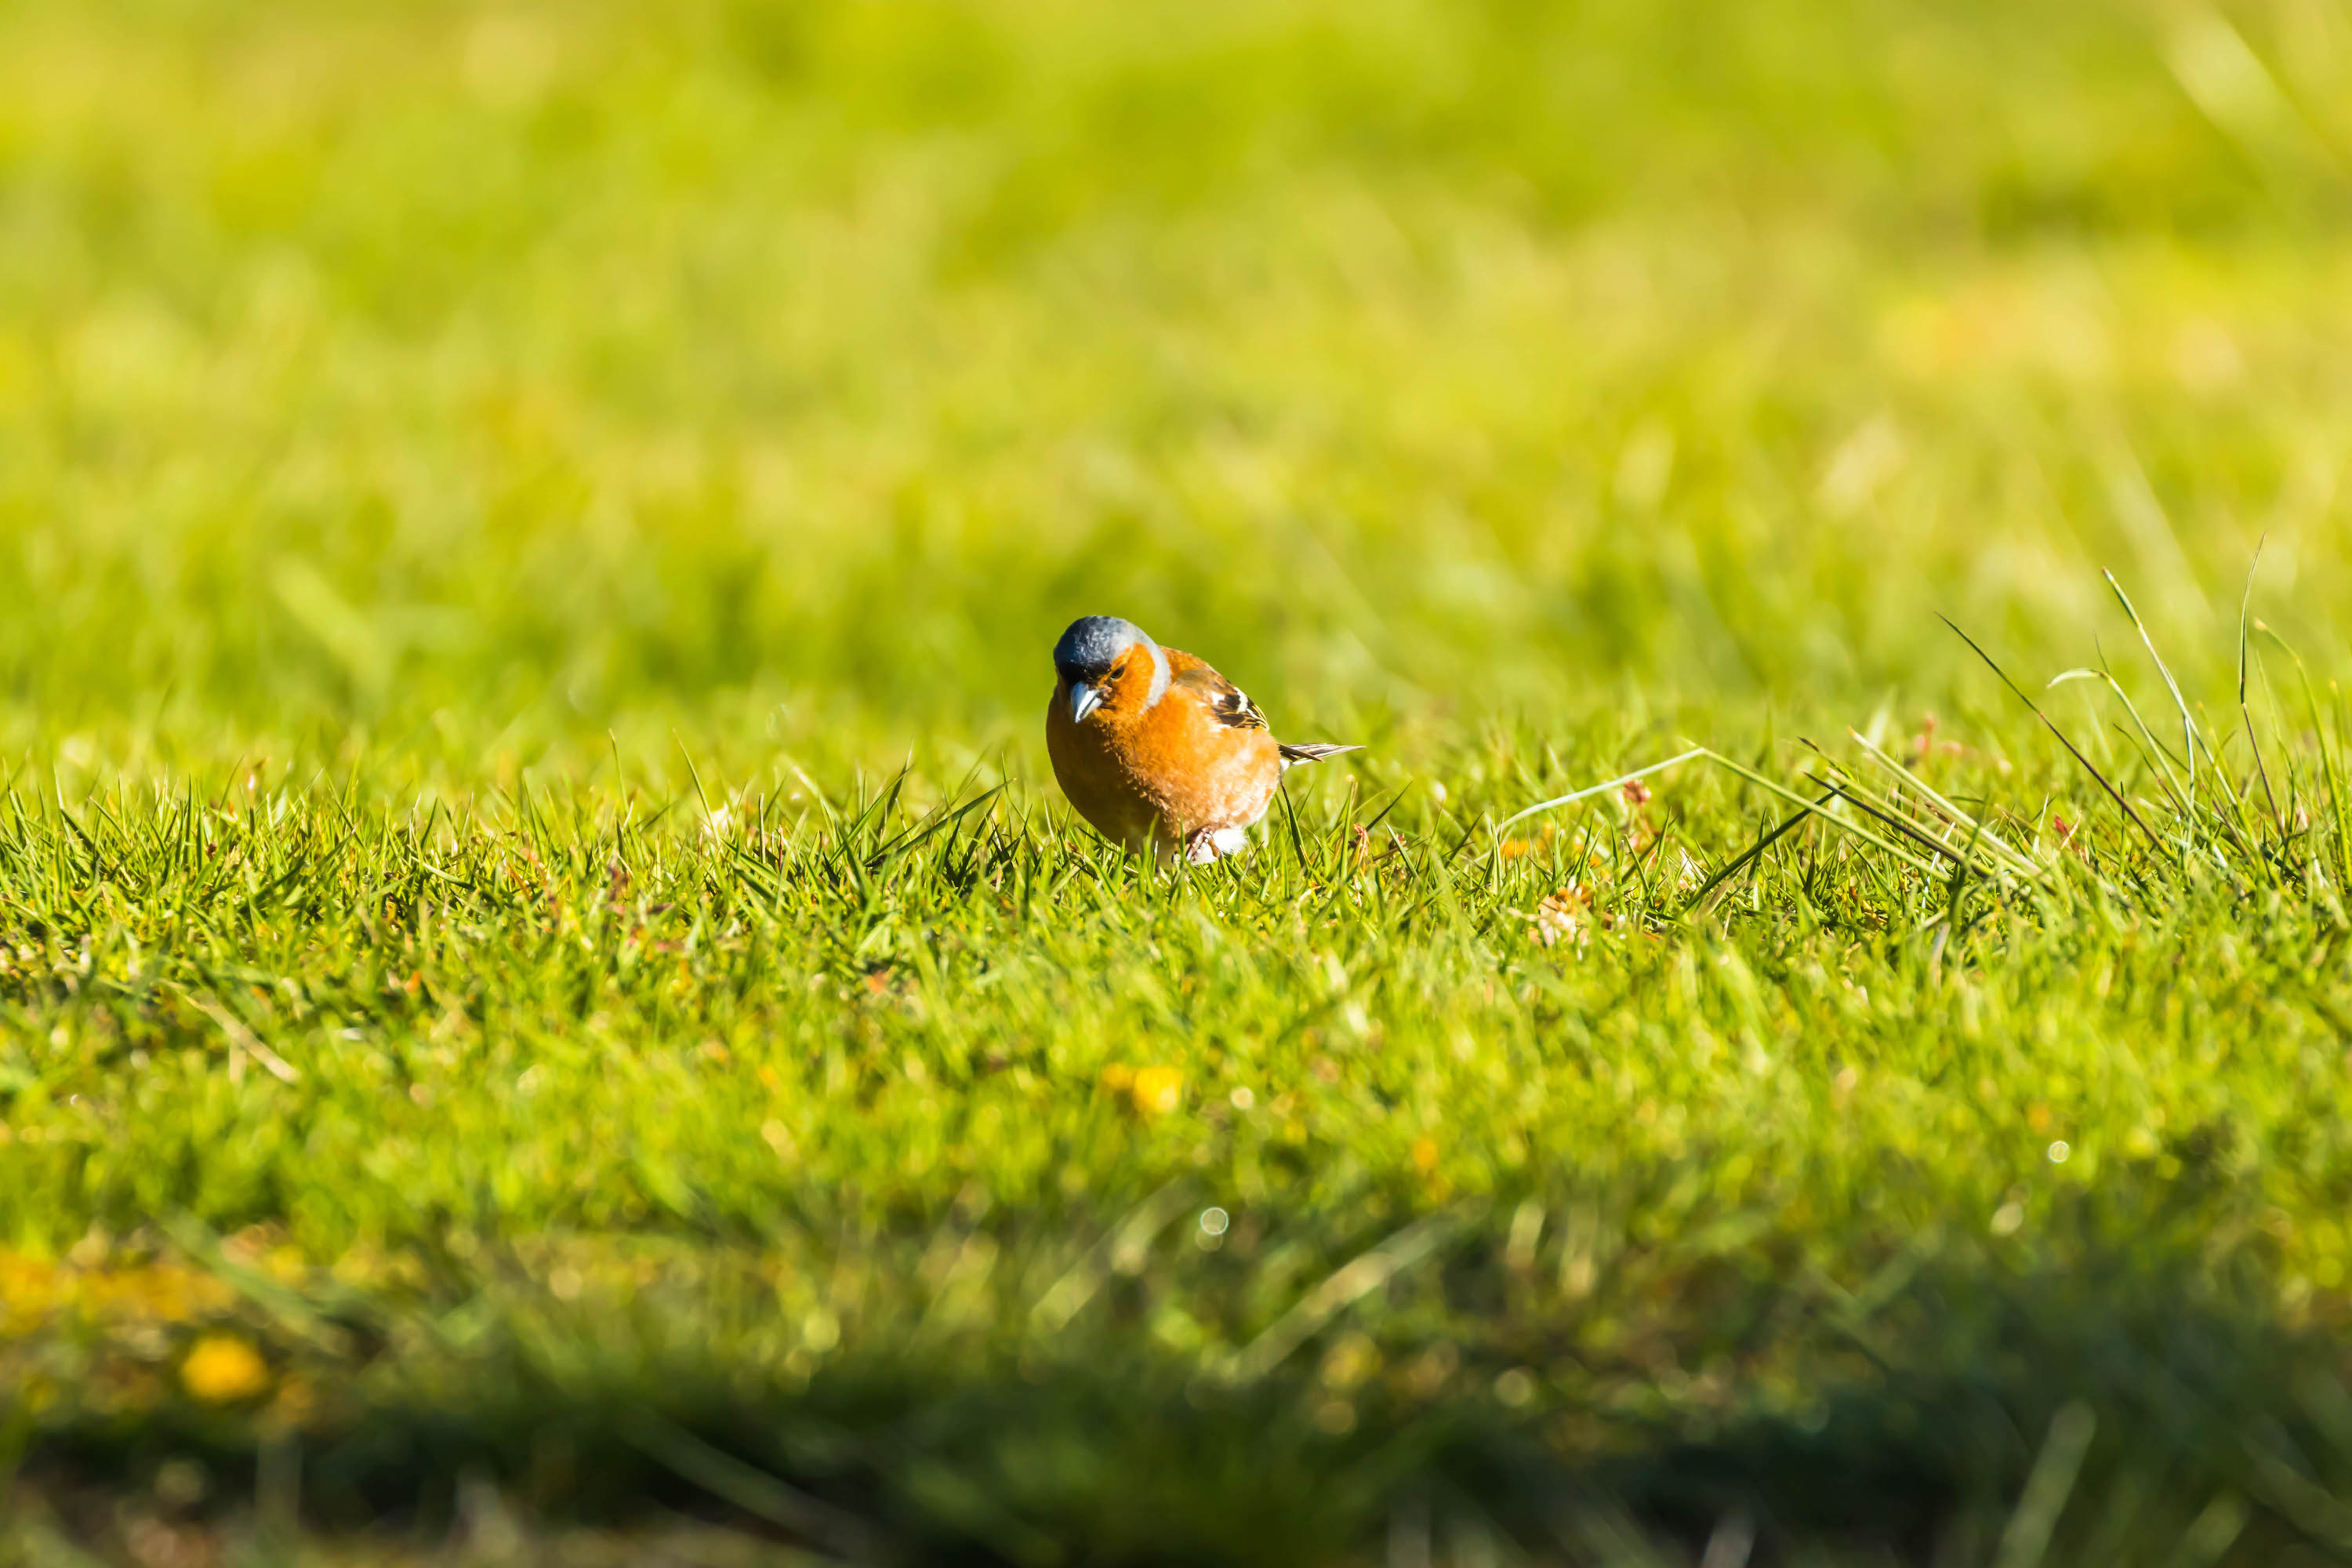  Follow these 6 tips to stop birds from eating your grass seed